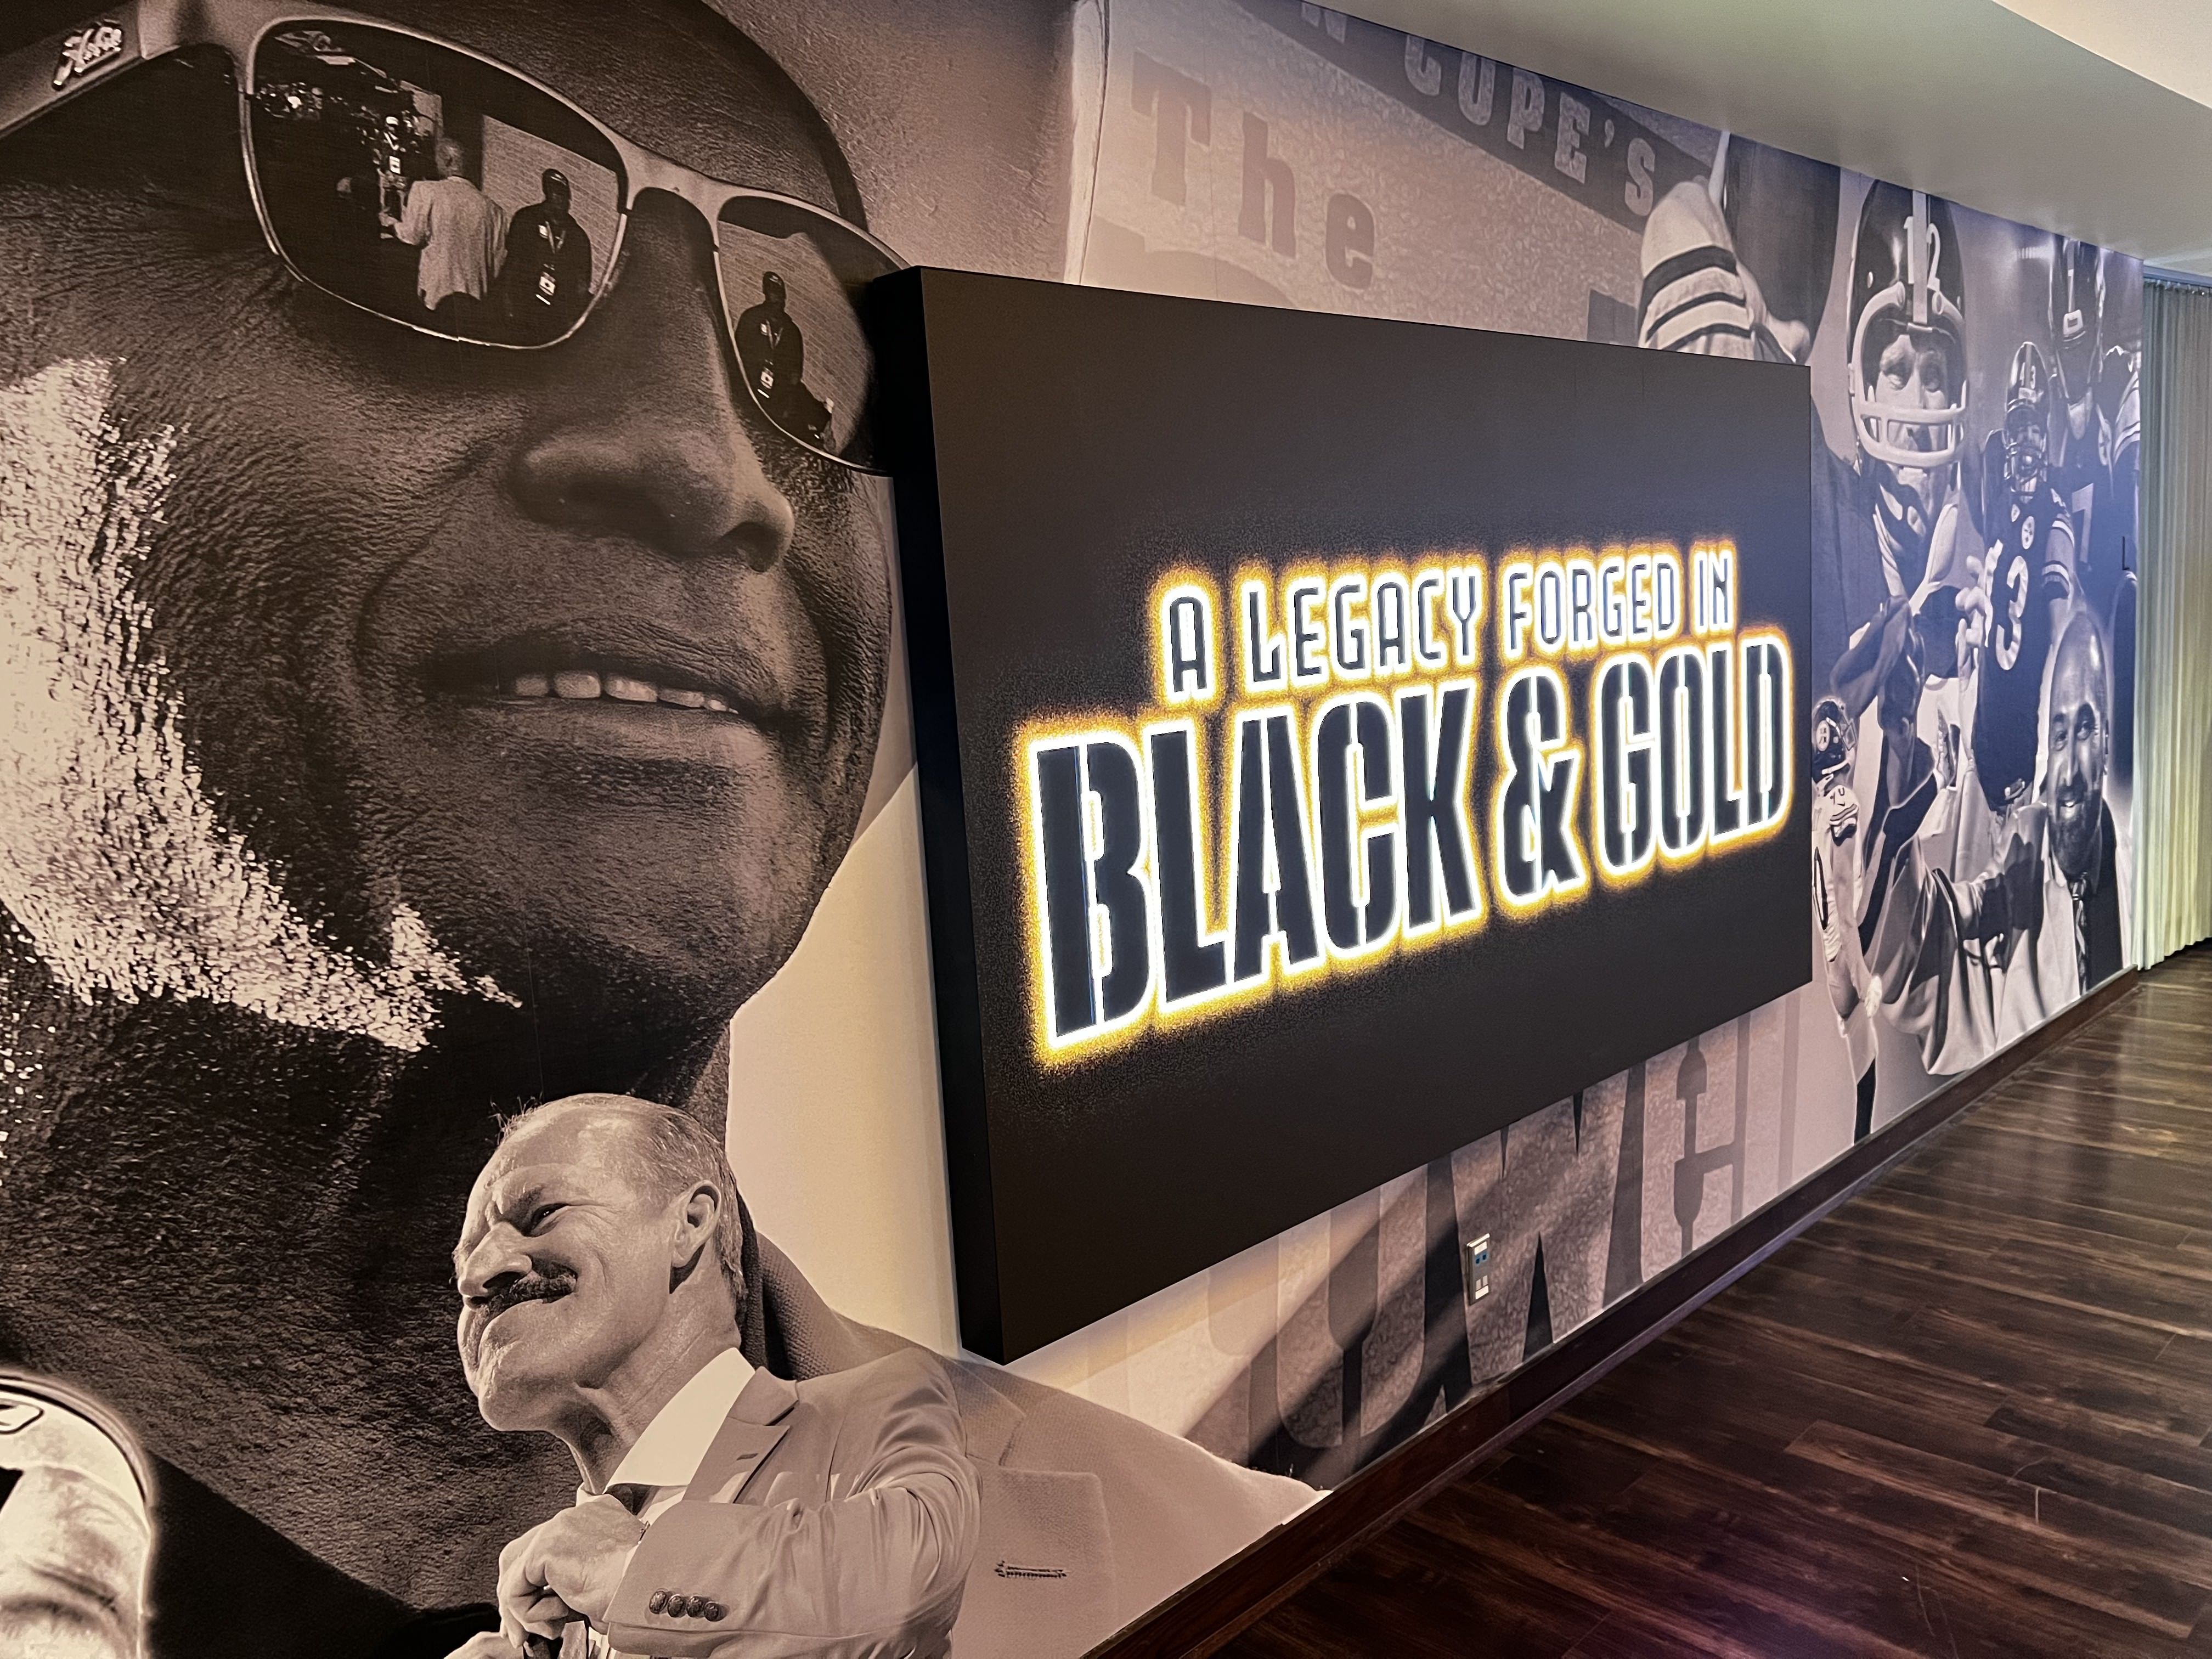 A wall at the Steelers exhibit at the hall of fame. 